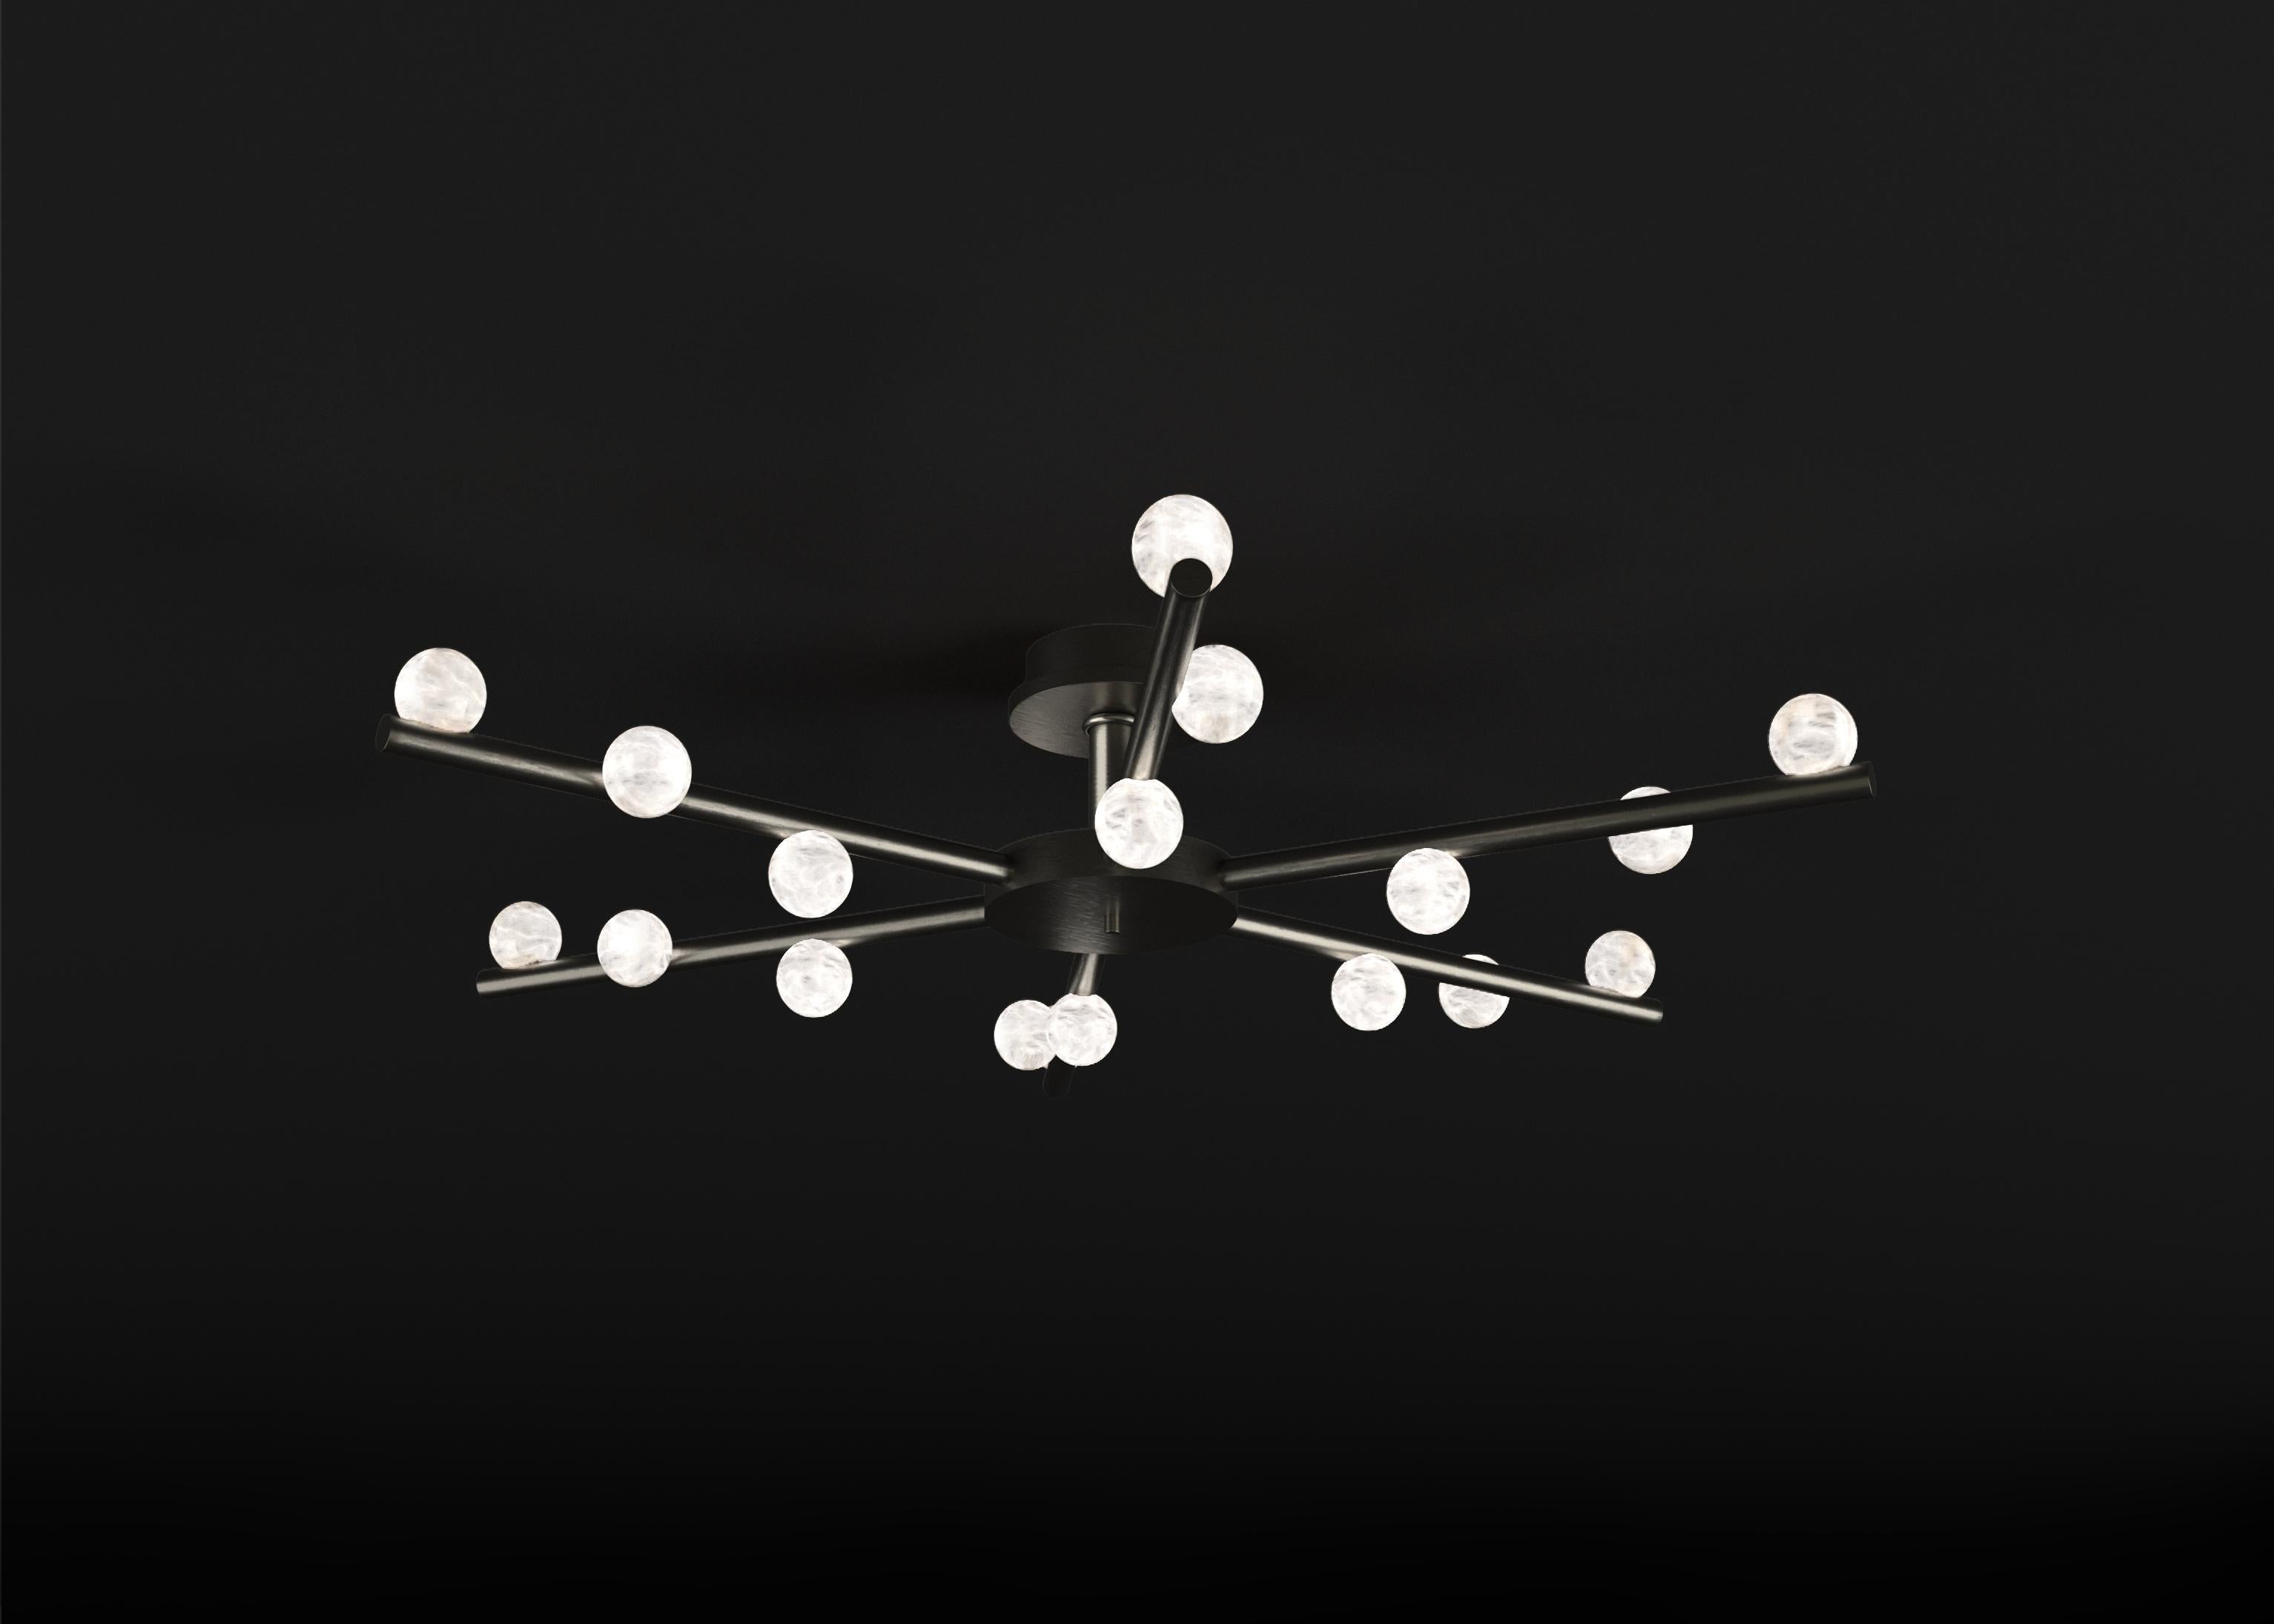 Demetra Brushed Black Metal Ceiling Lamp by Alabastro Italiano
Dimensions: D 85 x W 97 x H 22 cm.
Materials: White alabaster and brushed black metal.

Available in different finishes: Shiny Silver, Bronze, Brushed Brass, Ruggine of Florence, Brushed